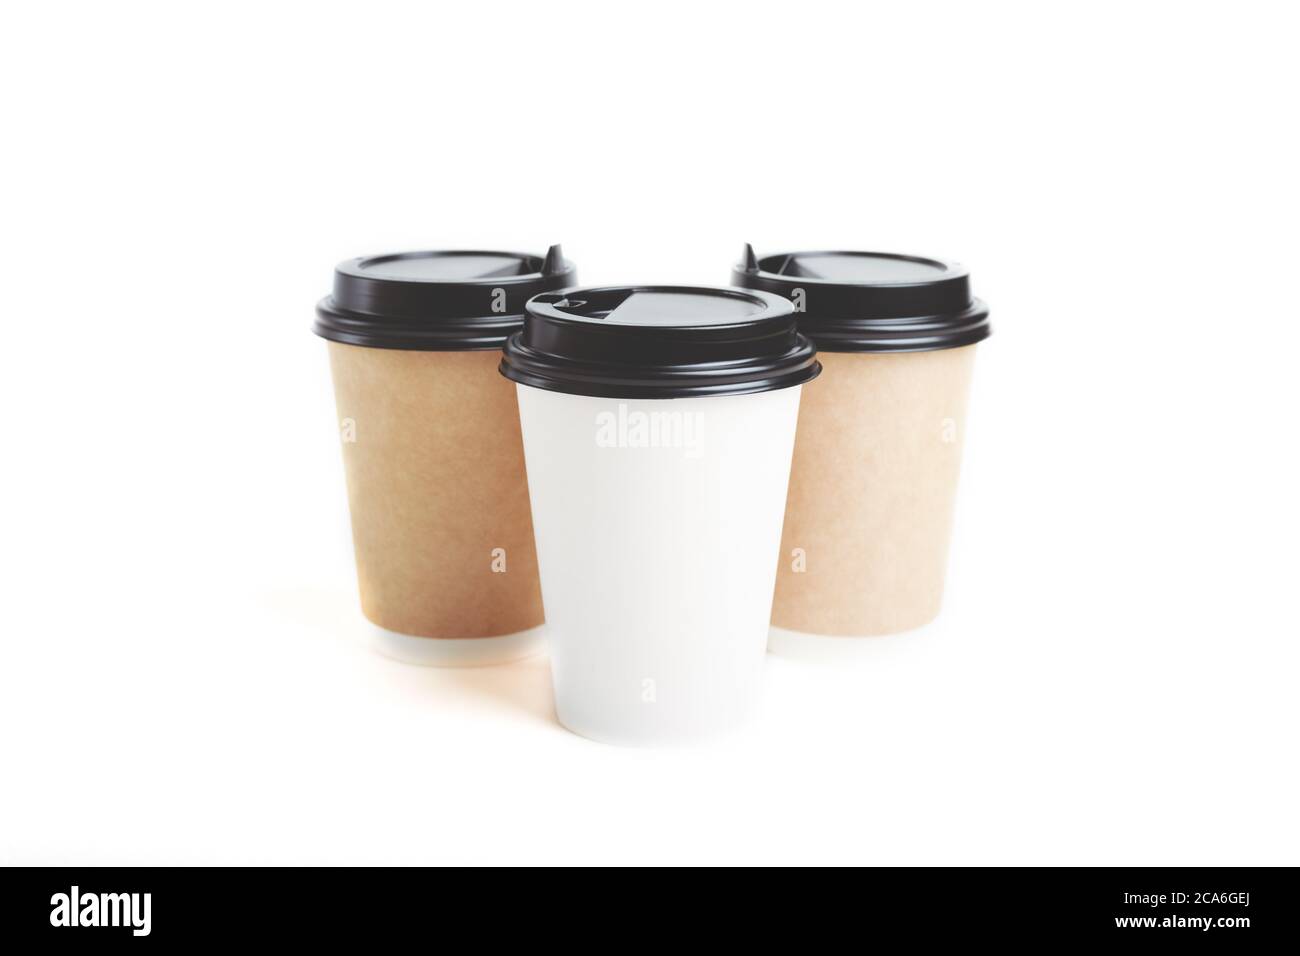 https://c8.alamy.com/comp/2CA6GEJ/three-eco-friendly-paper-craft-cups-for-coffee-with-black-lid-on-the-white-background-zero-waste-plastic-free-concept-sustainable-lifestyle-compos-2CA6GEJ.jpg